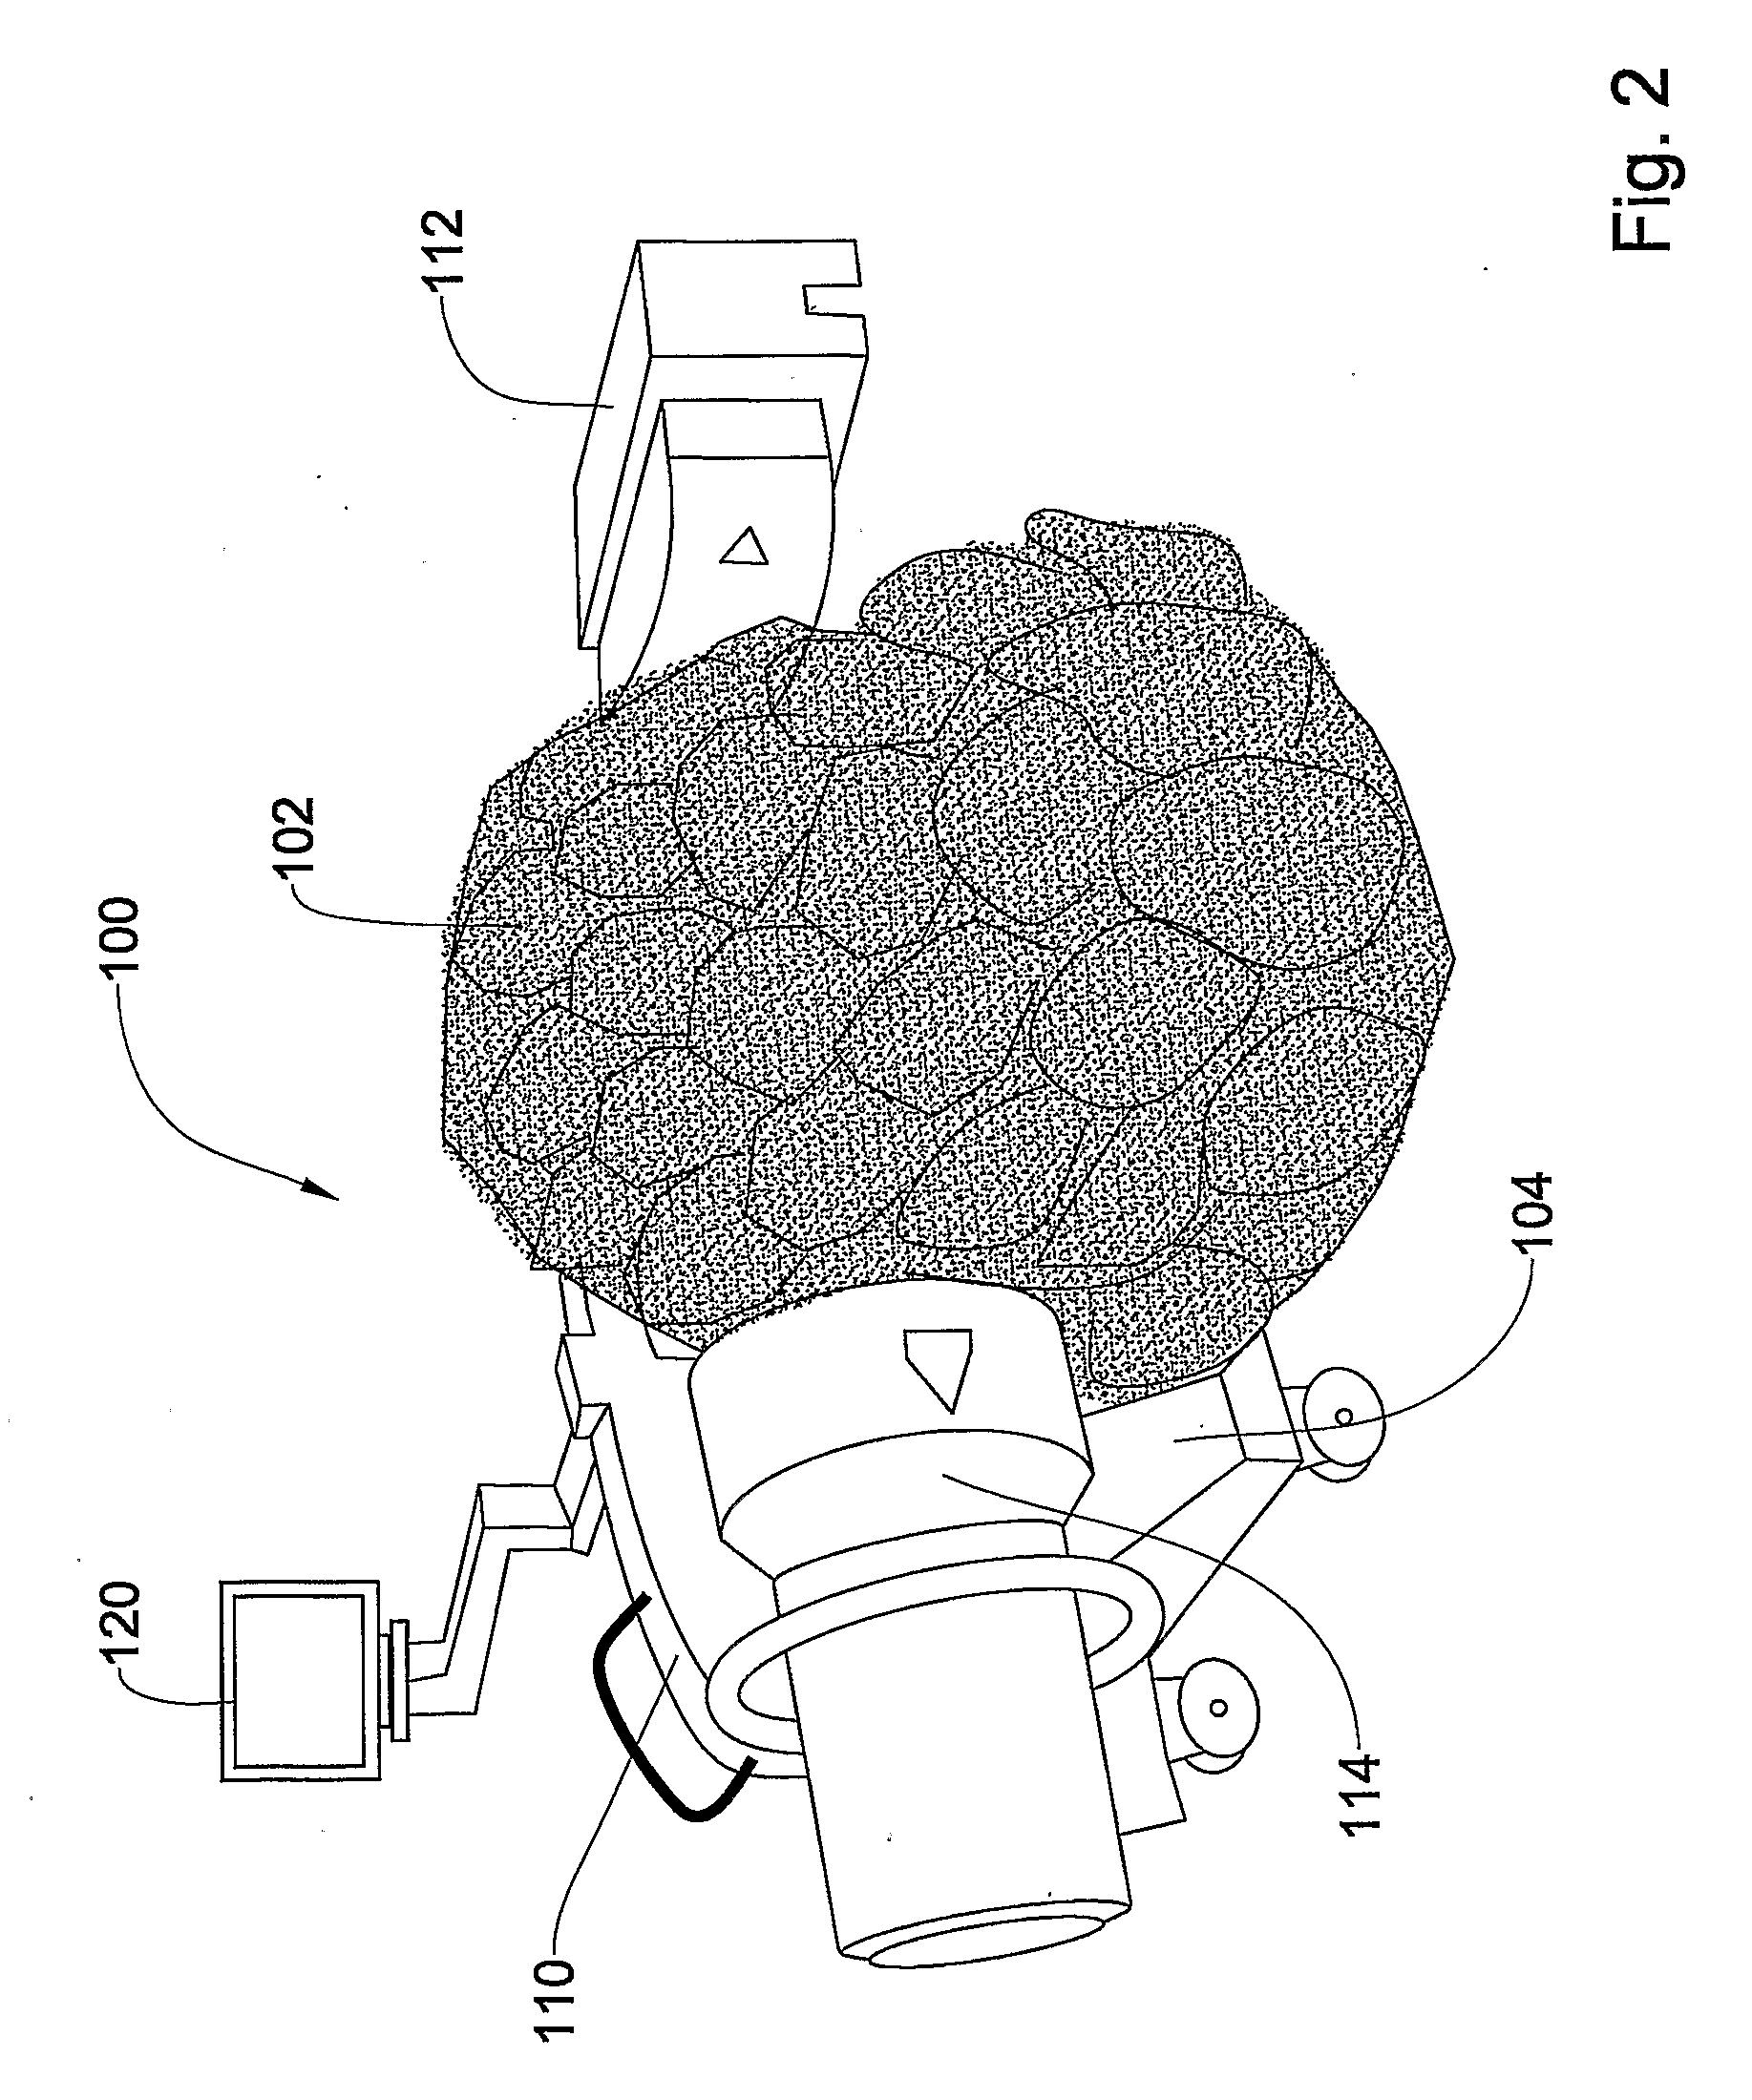 Method and system for diagnosing and treating a pest infested body